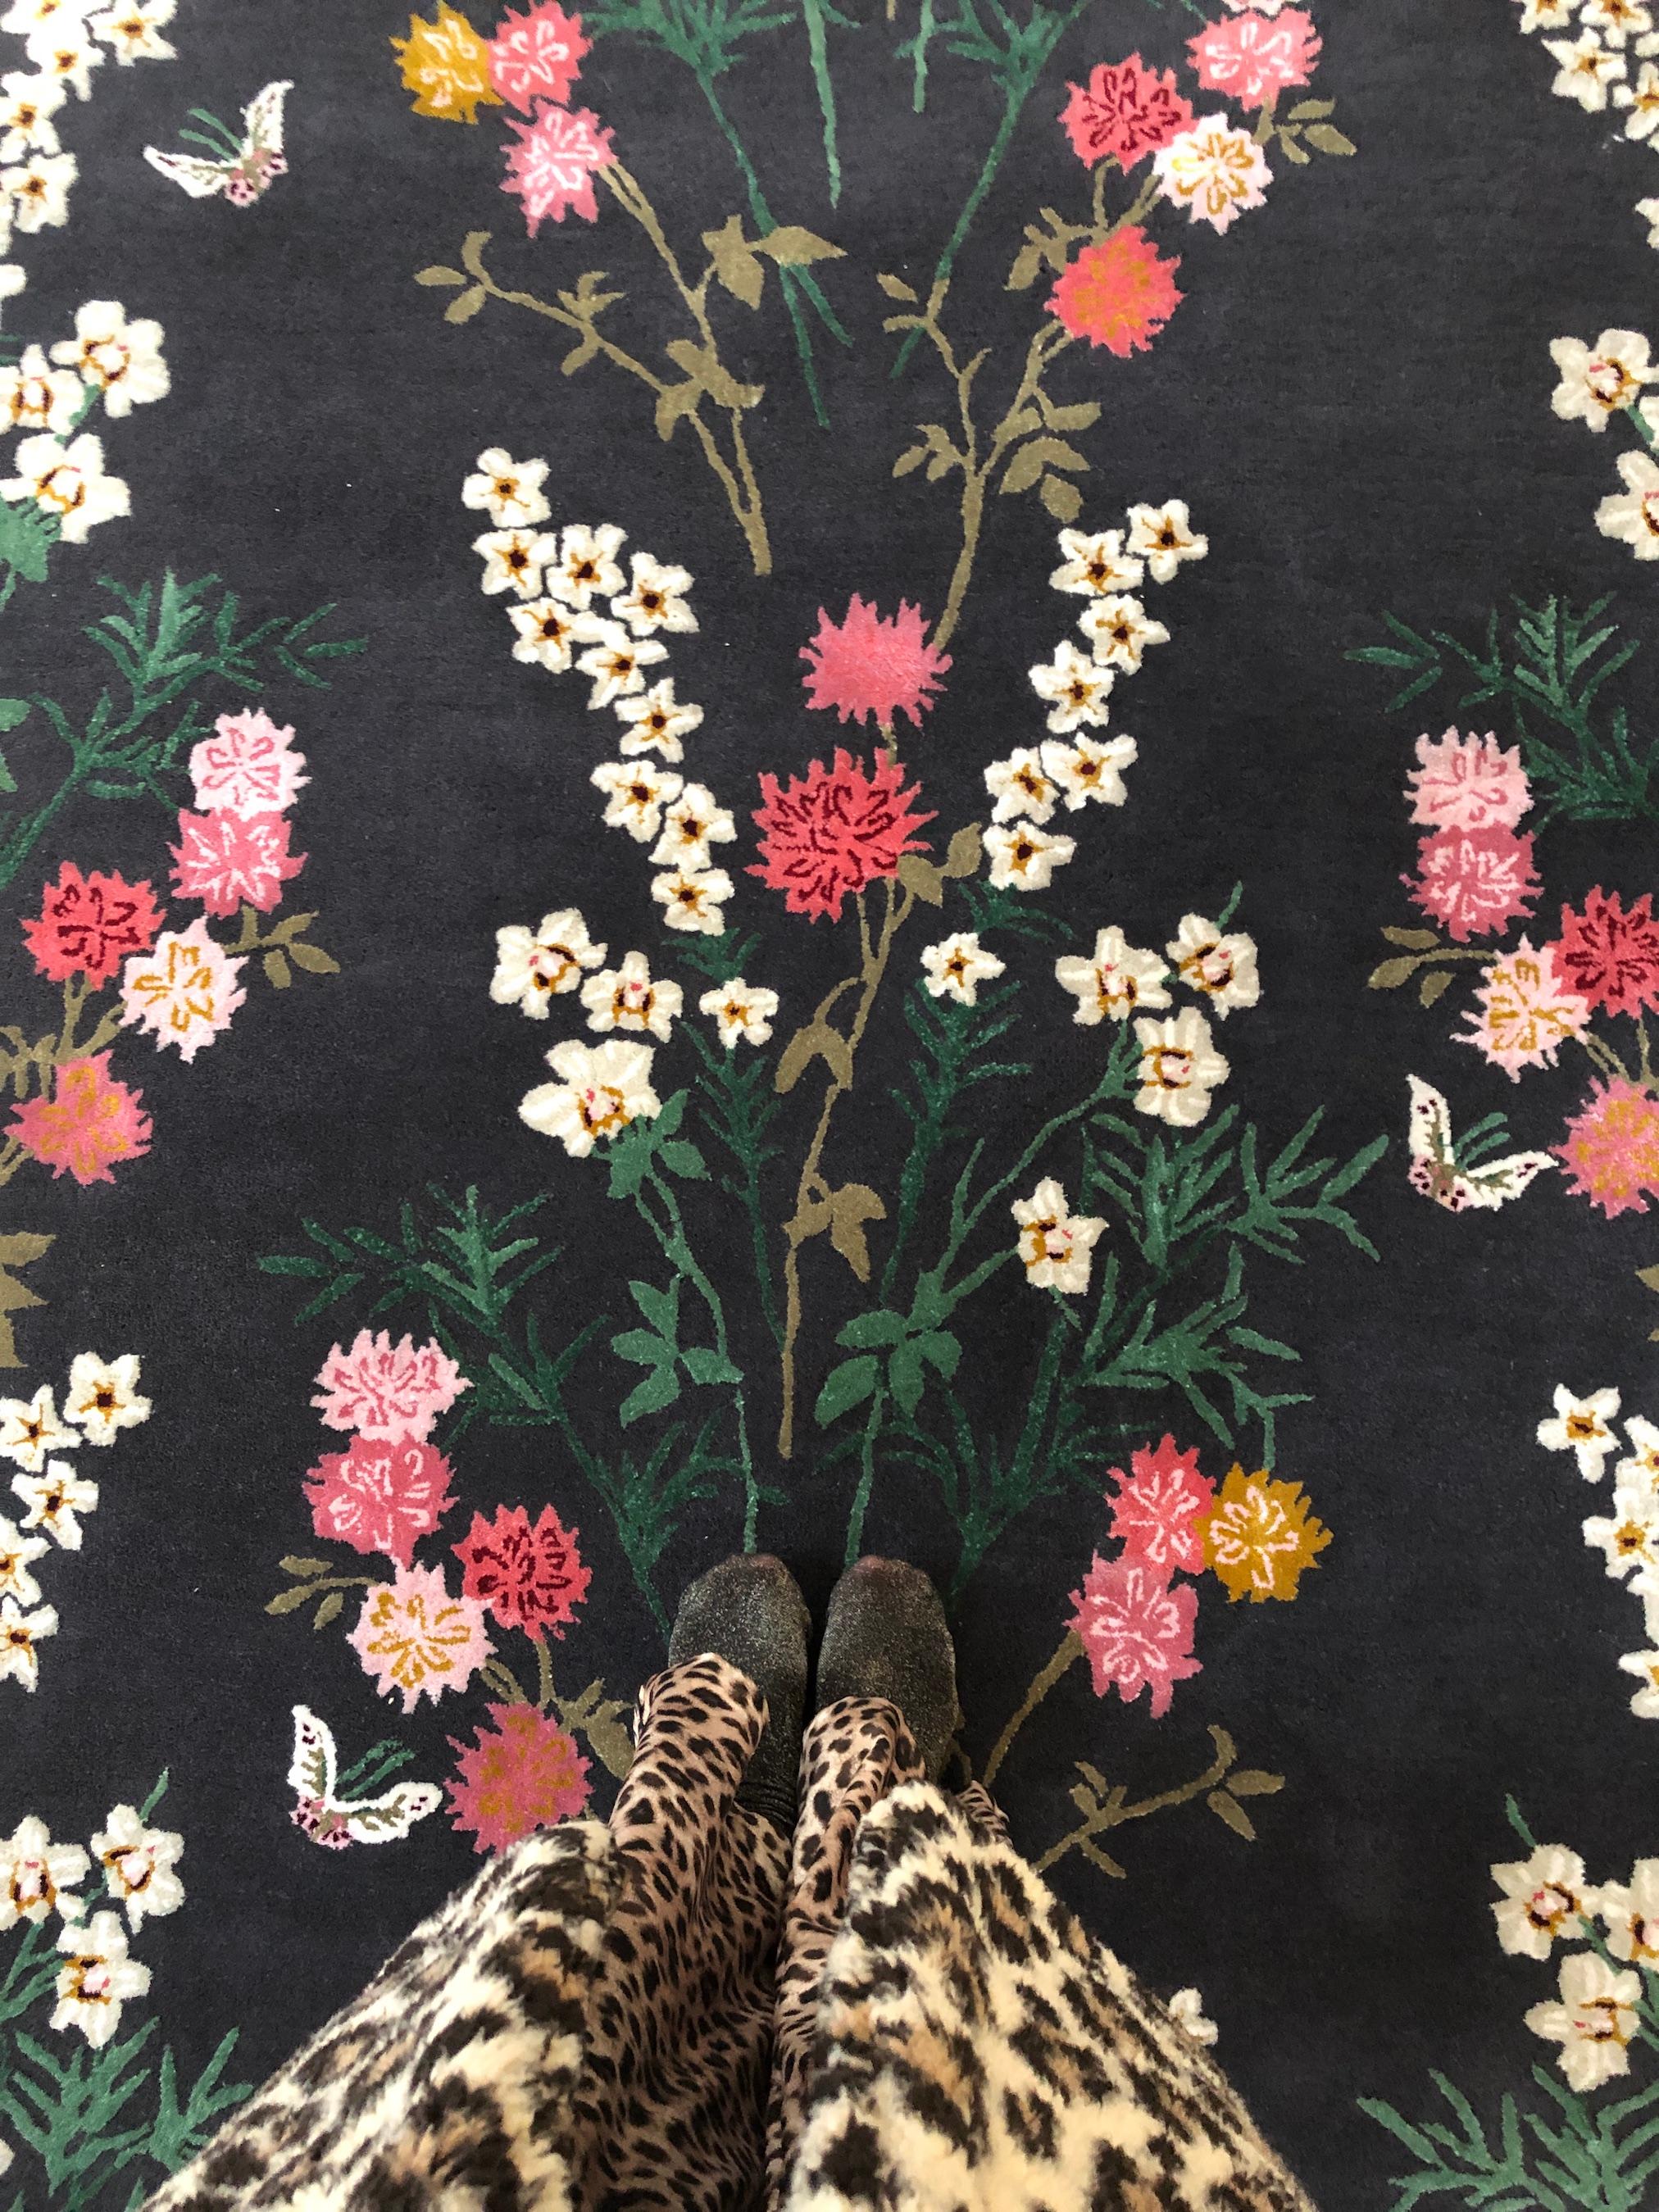 Flowers of Virtue Graphite is a hand tufted wool and viscose rug by Scottish designer Wendy Morrison. The rug is handcrafted in India and is Goodweave certified, meaning you can be confident that no child labour has been used during the manufacture